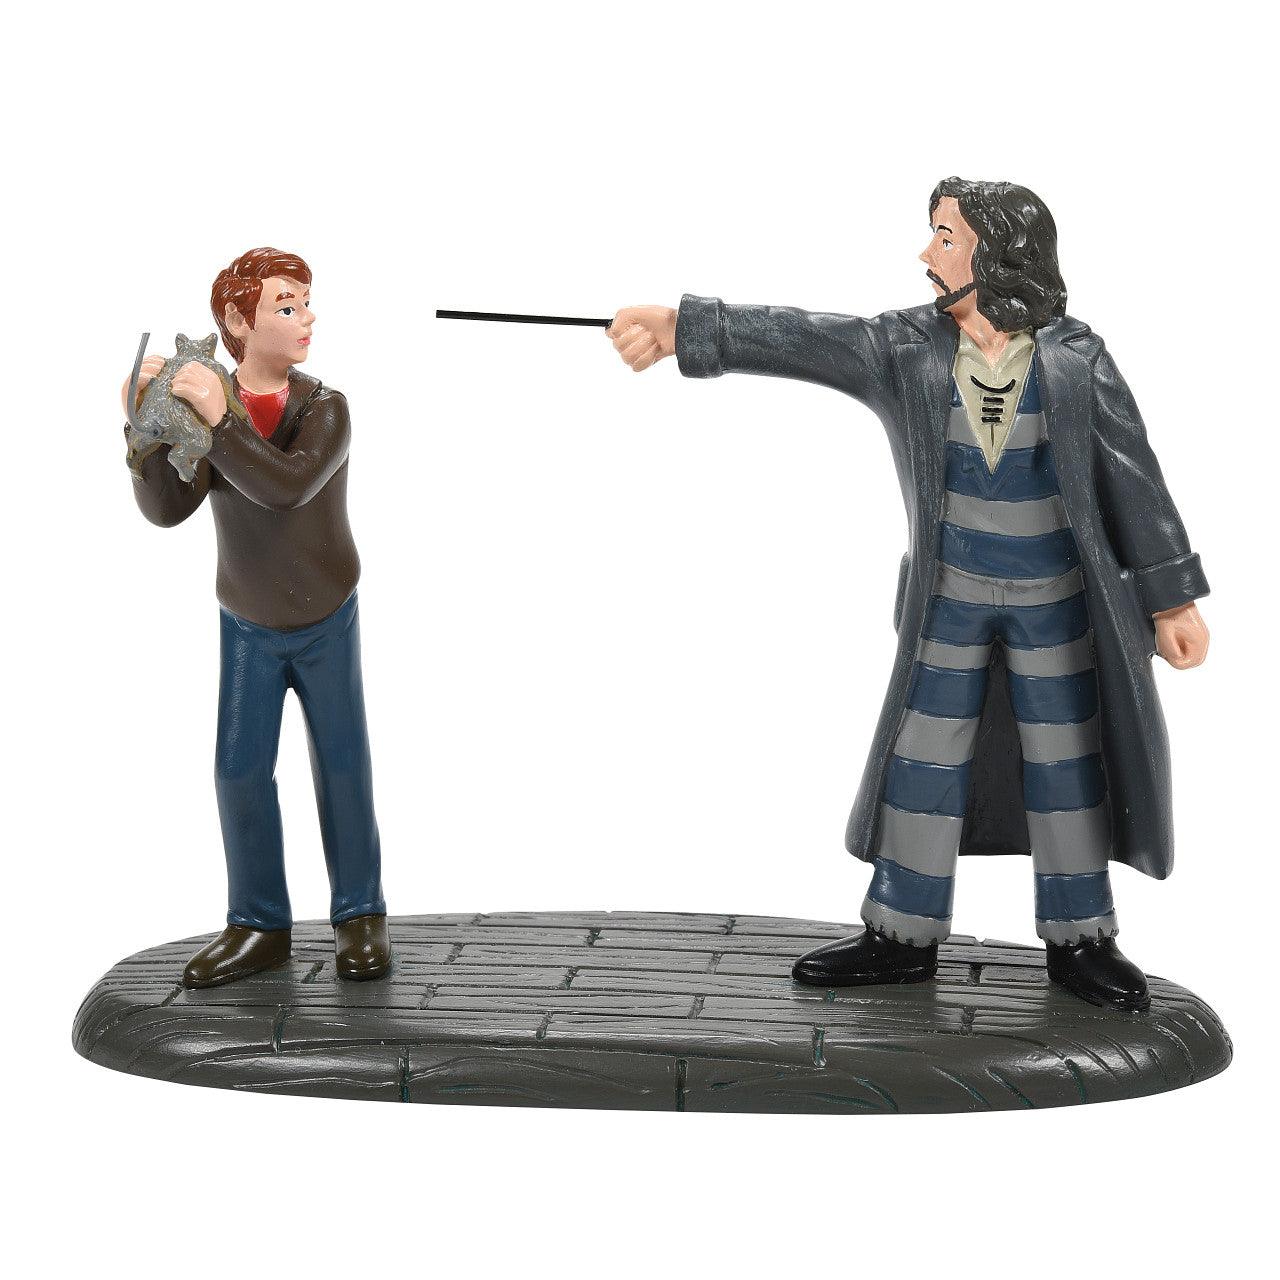 Department 56 - "Come out and play Peter" Ron & Sirius - KleinLand